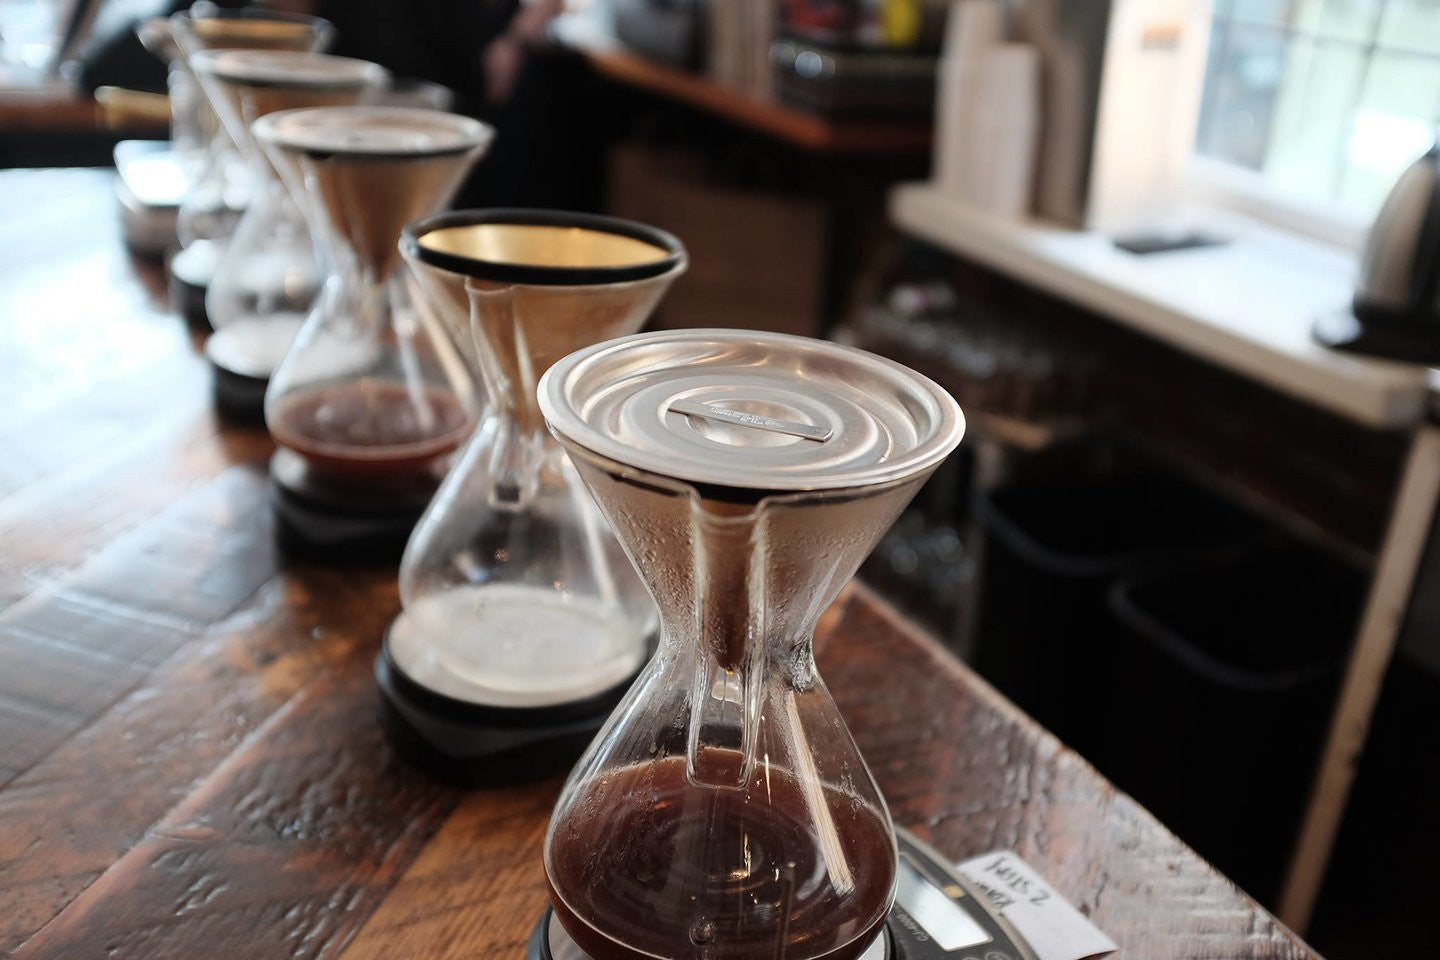 What’s the best way to make coffee? – Our comprehensive brewing guide